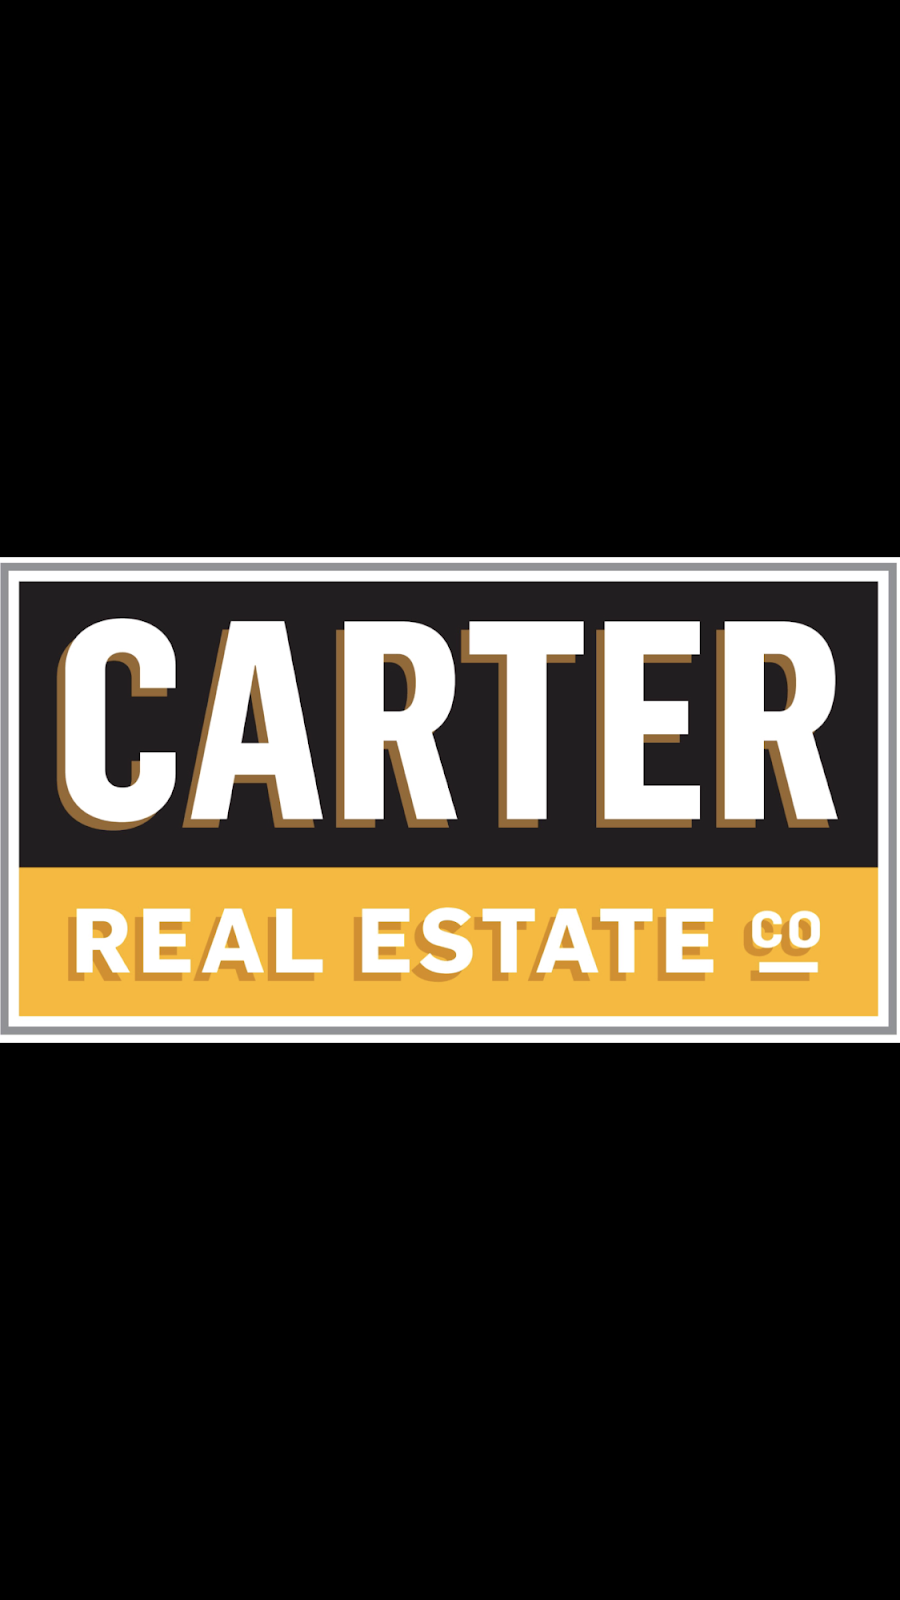 Carter Real Estate Company | 1541 Brown St, Akron, OH 44301, USA | Phone: (330) 962-7422